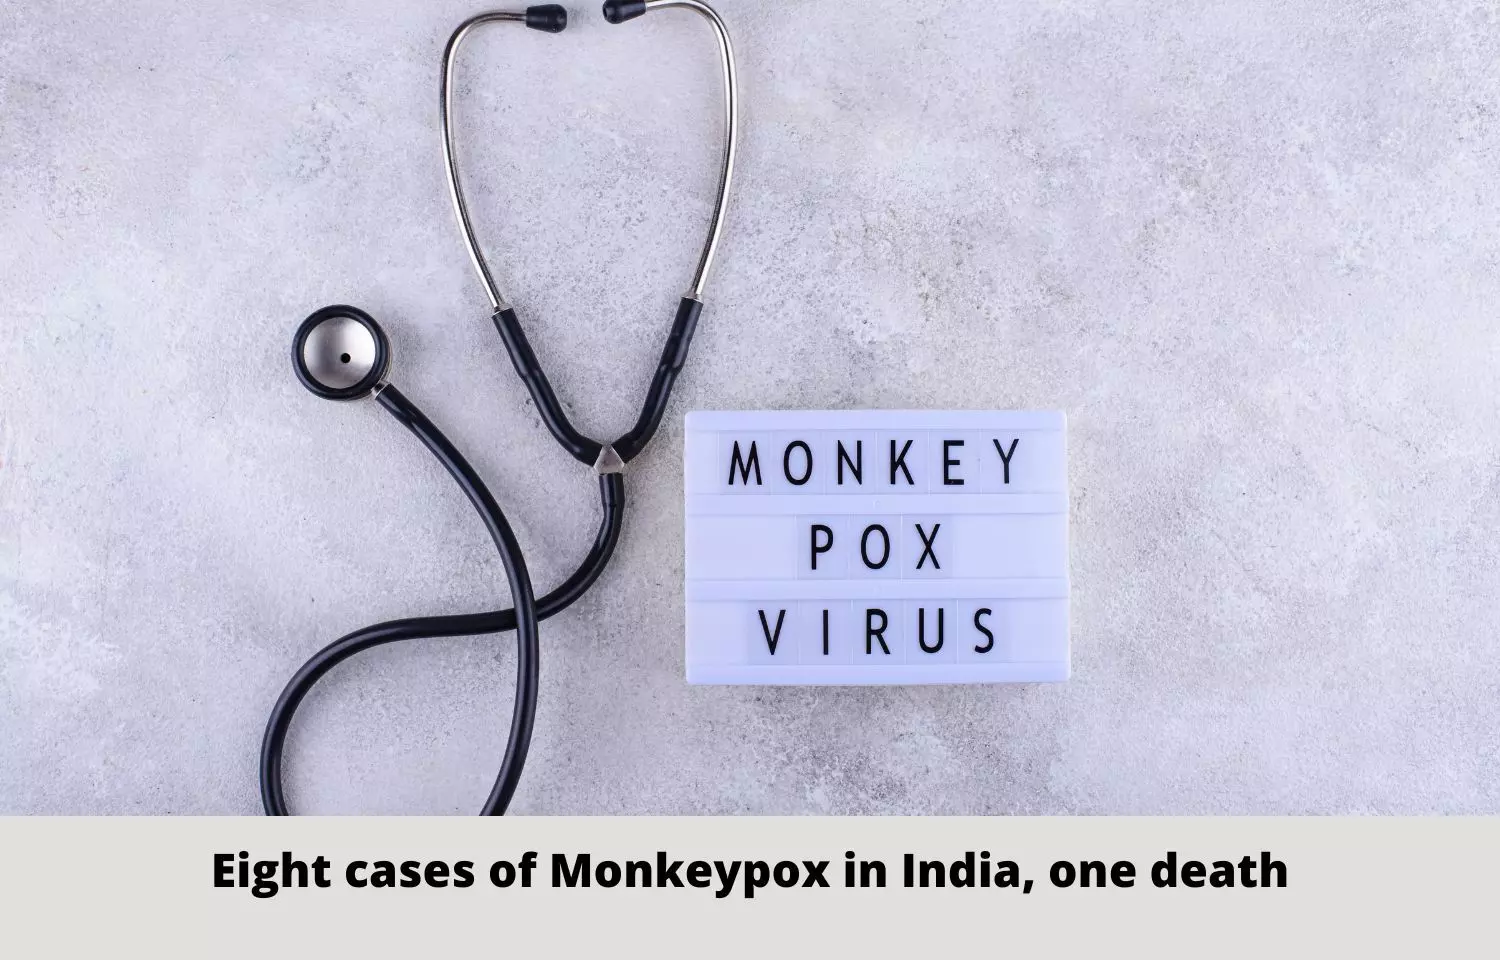 Eight cases of Monkeypox in India, one death